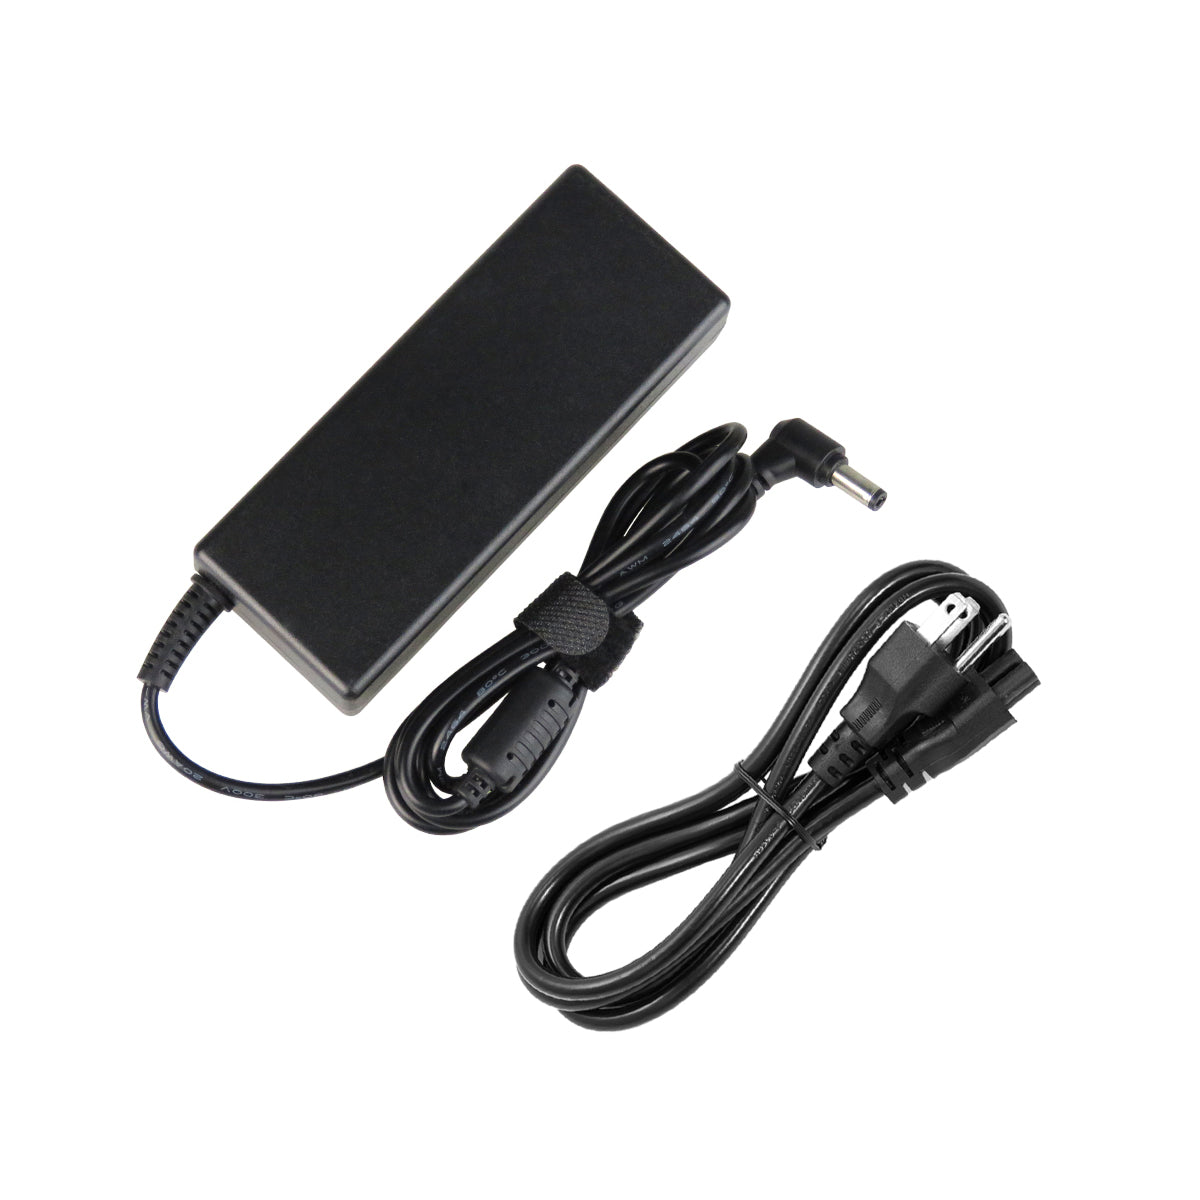 AC Adapter Charger for ASUS X64 Notebook.